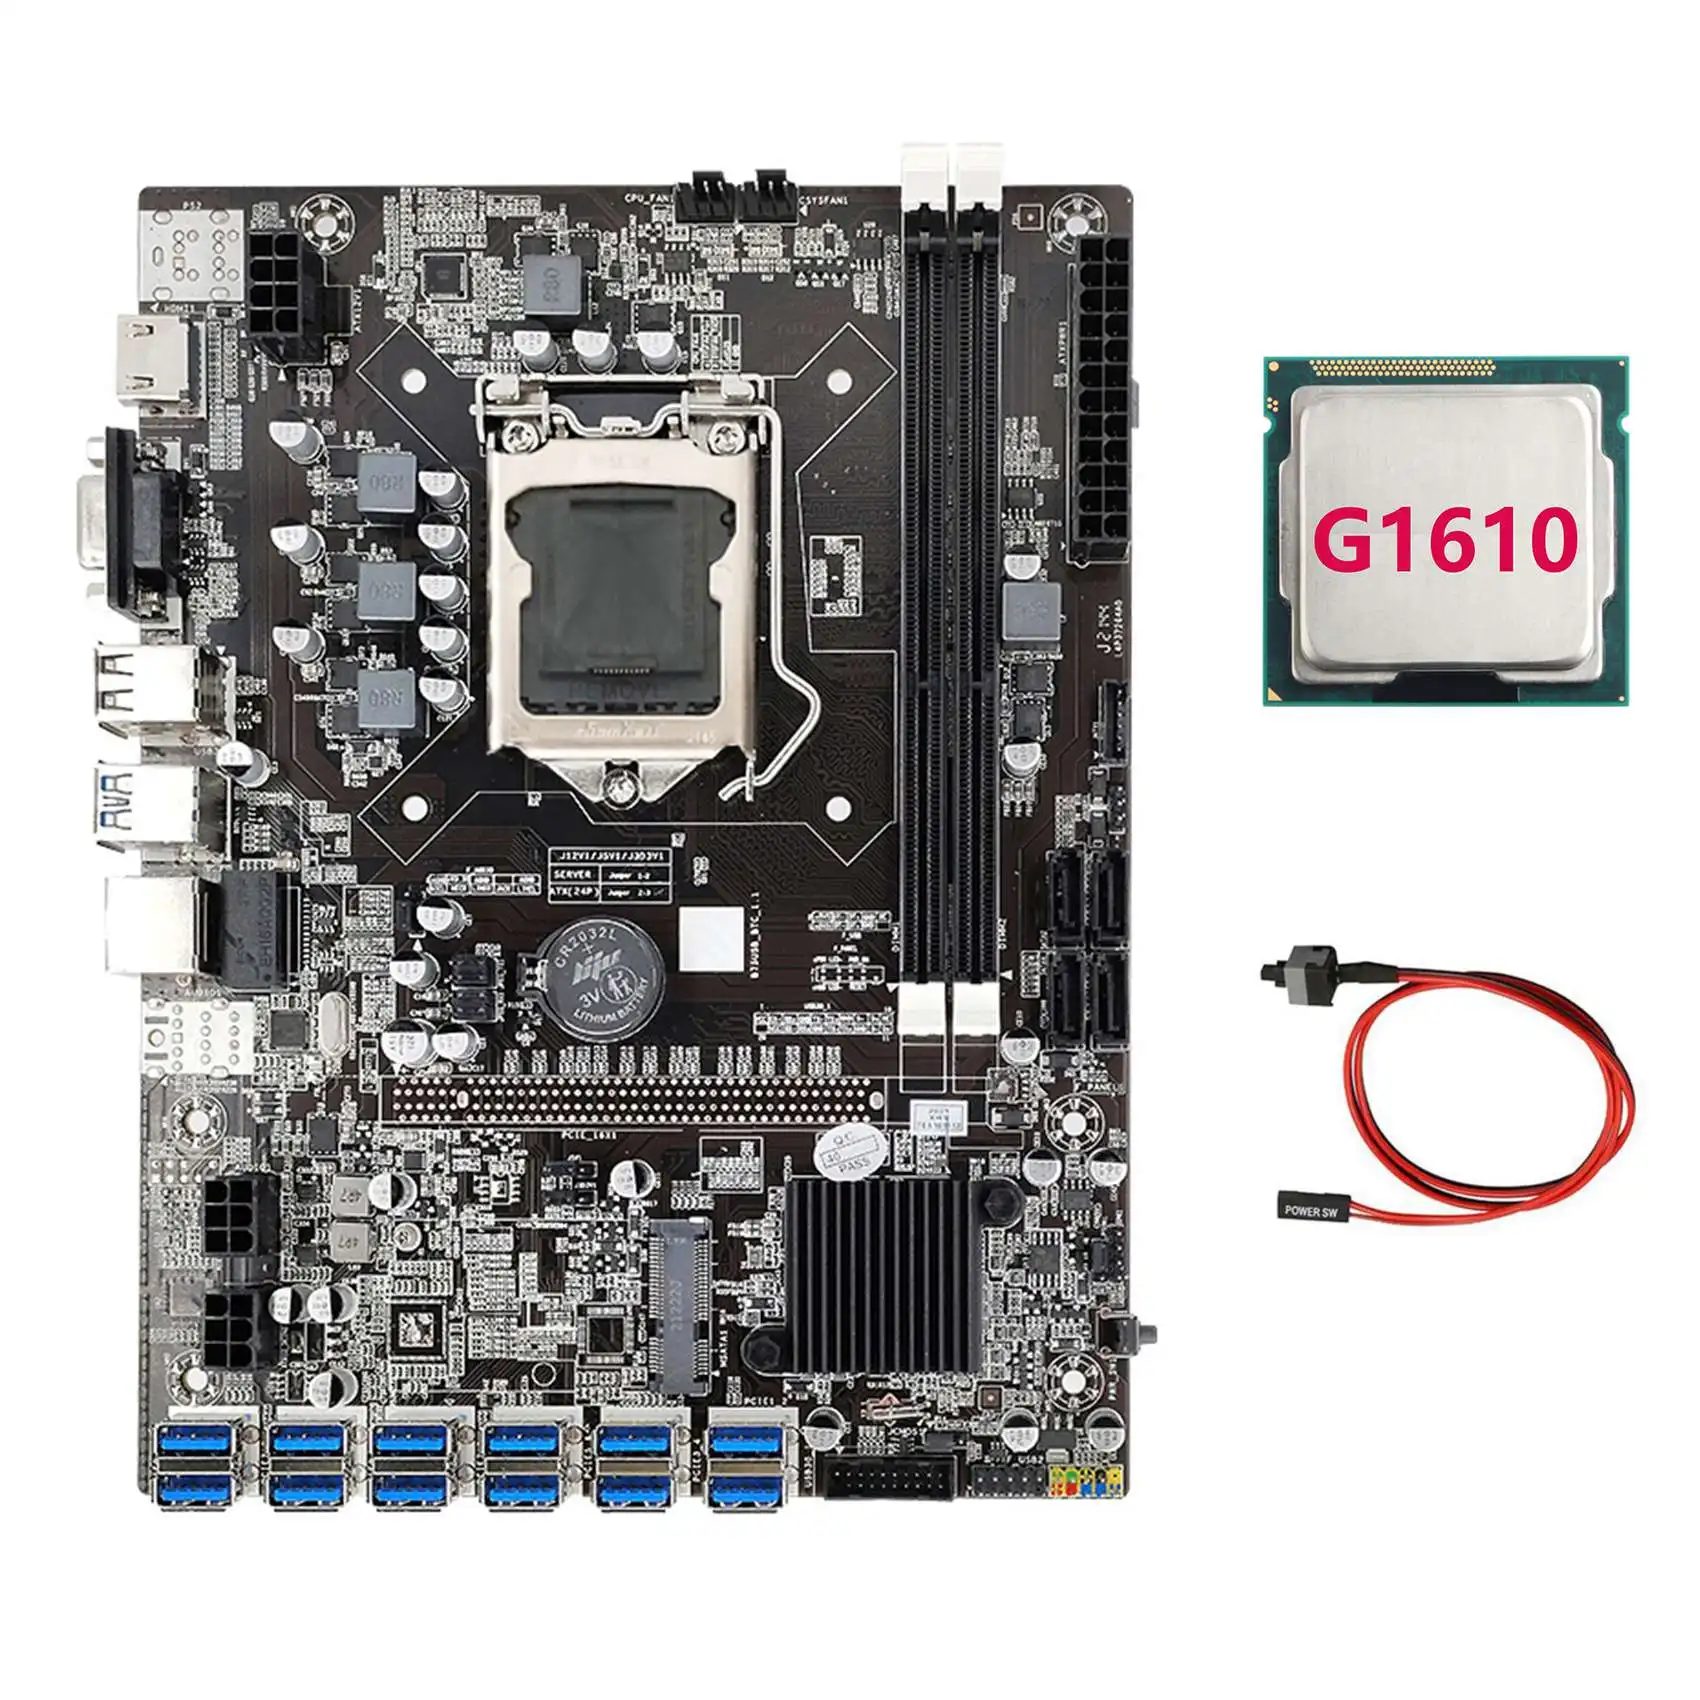 B75 ETH Mining Motherboard 12 PCIE to USB Adapter+G1610 CPU+Switch Cable LGA1155 MSATA DDR3 B75 USB Miner Motherboard